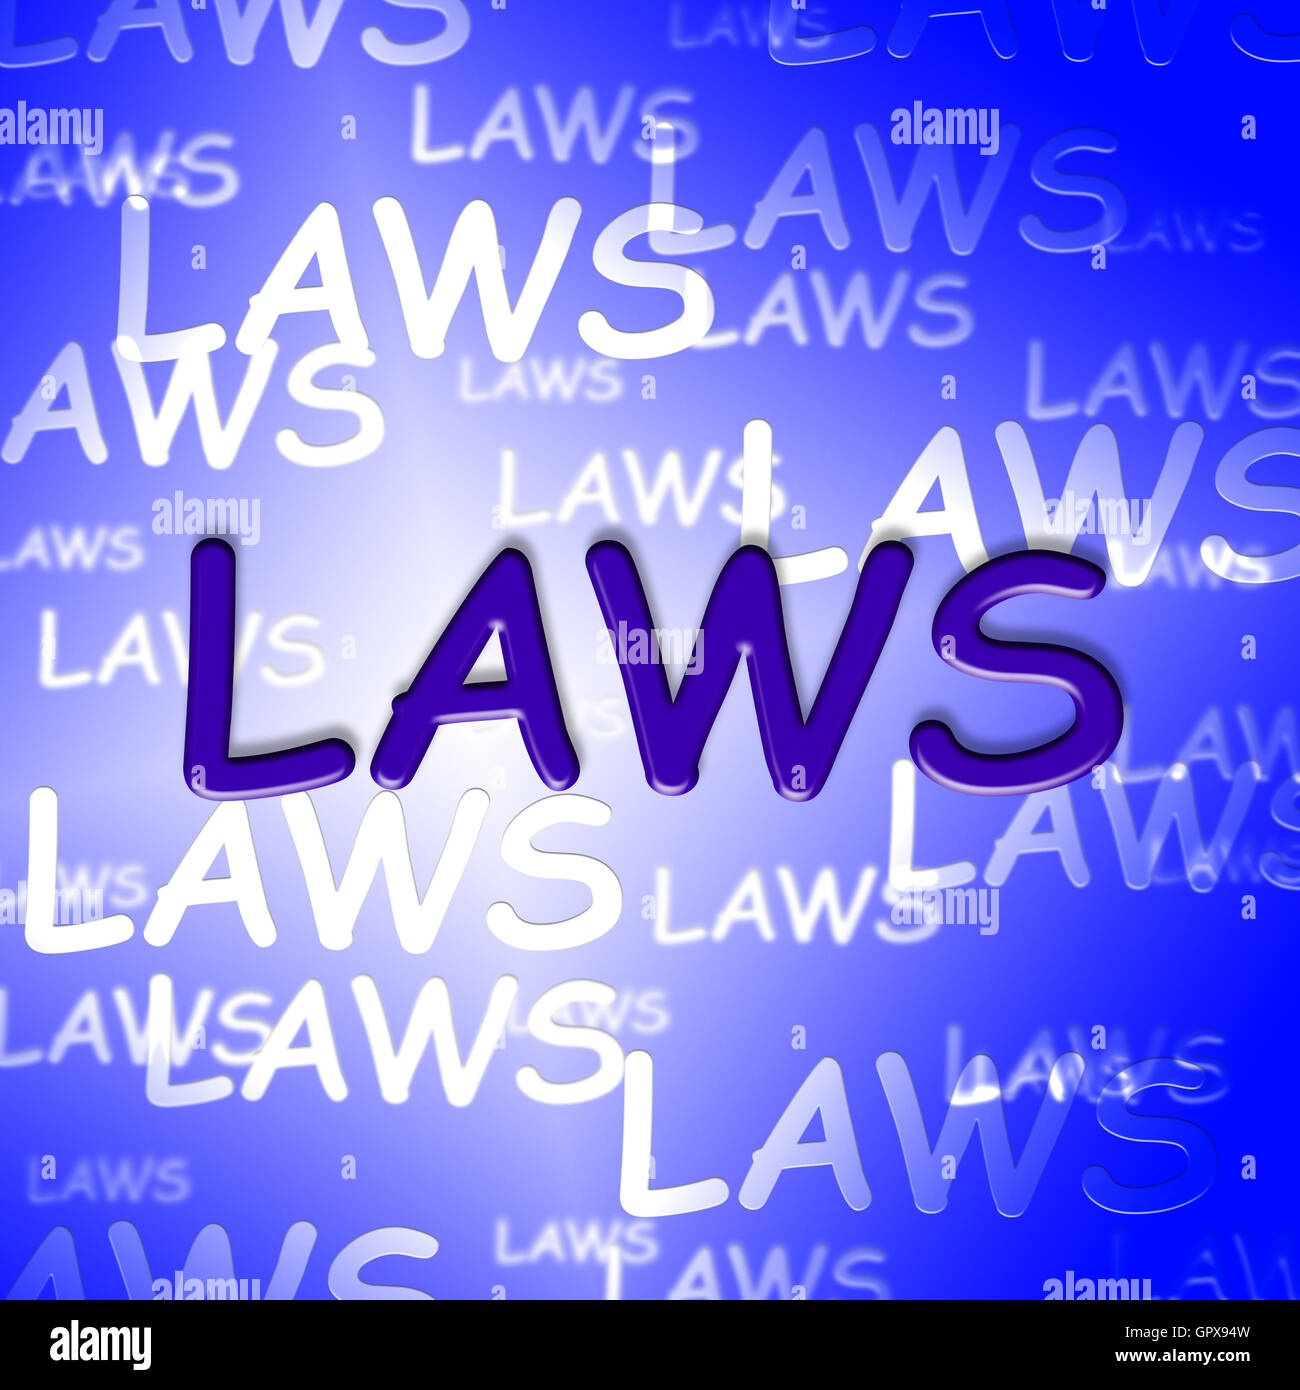 Law Words Showing Bylaws Legal And Ruling Stock Photo